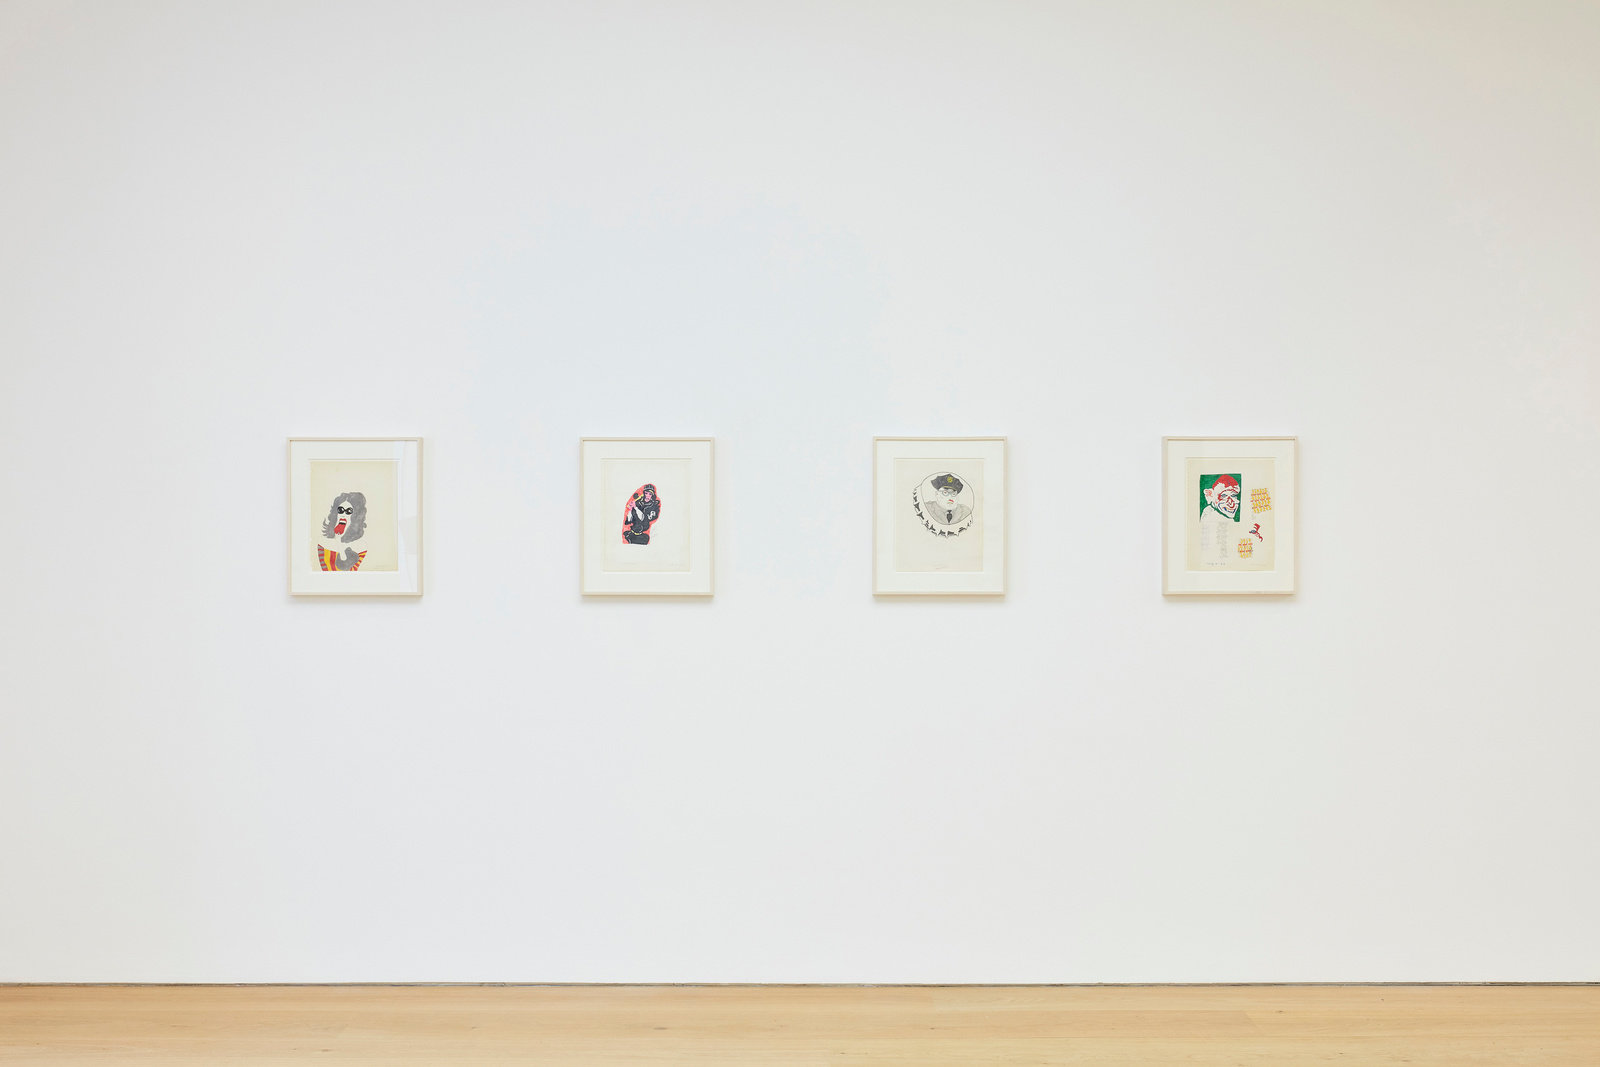 An installation view of four Karl Wirsum framed works on paper hanging on a wall horizontally.